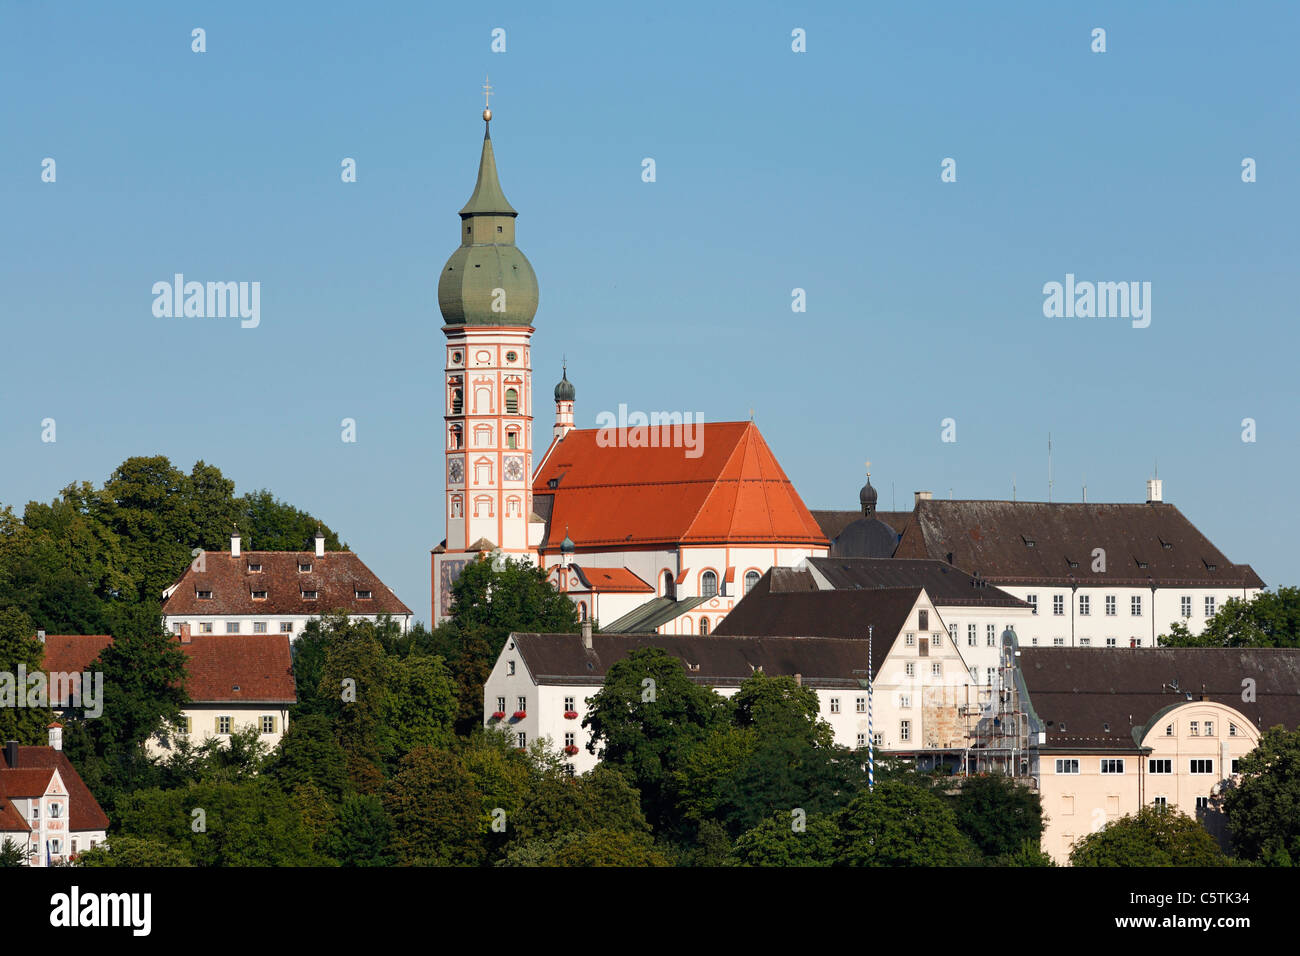 Germany, Bavaria, Upper Bavaria, View of andechs abbey Stock Photo